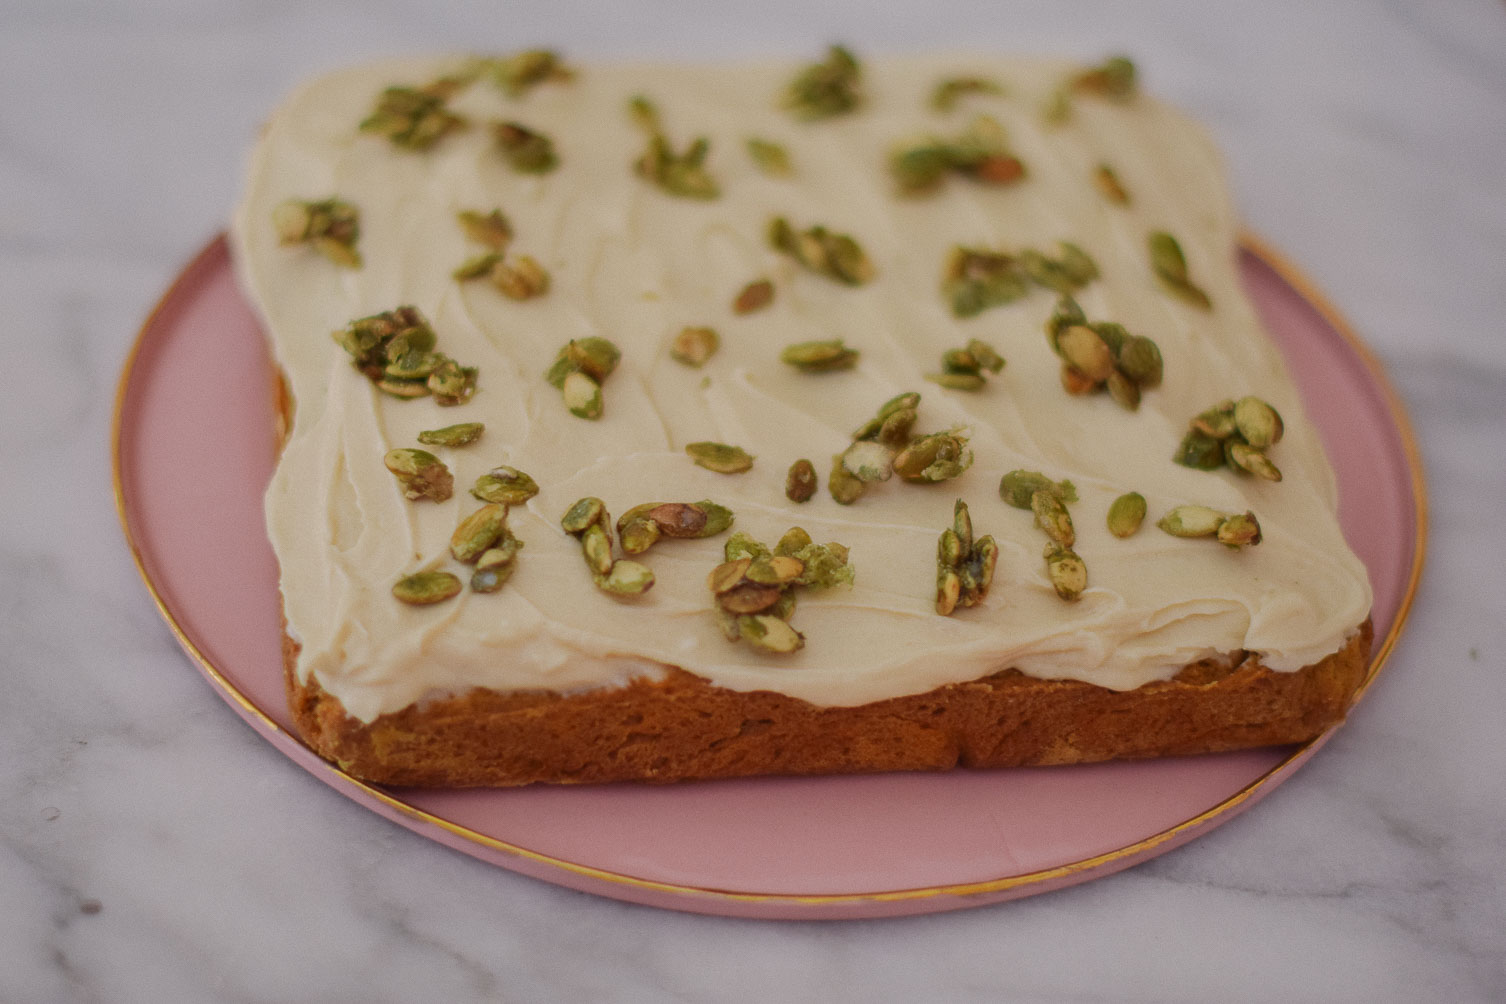 easy and delicious fall recipe ideas - sweet potato cake with candied pipits and cream cheese frosting on one brass fox